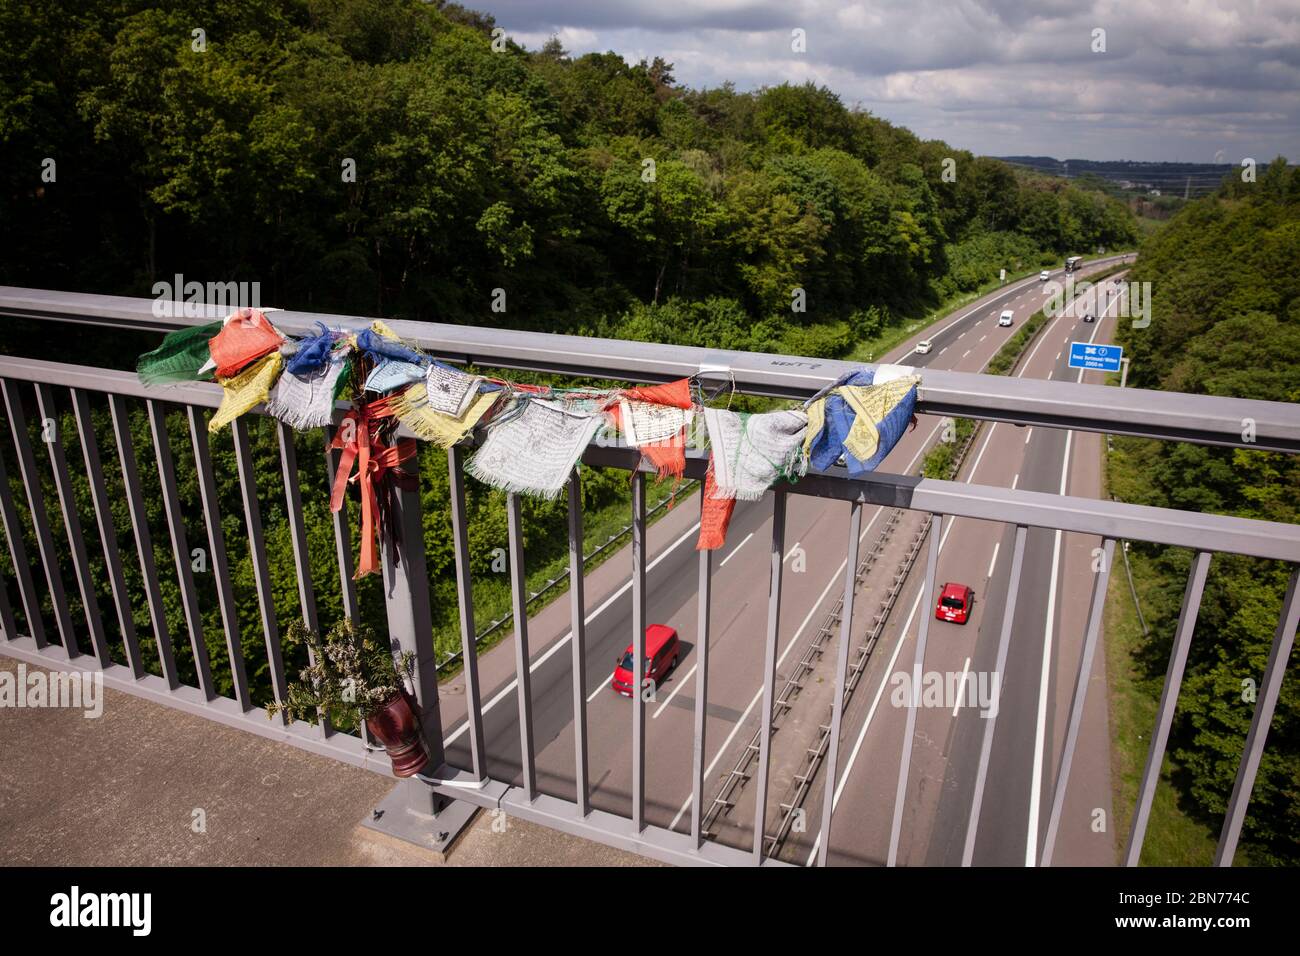 buddhist flags in memory of a man who committed suicide by jumping from this bridge over the A45 Autobahn south of Dortmund, North Rhine-Westphalia, G Stock Photo